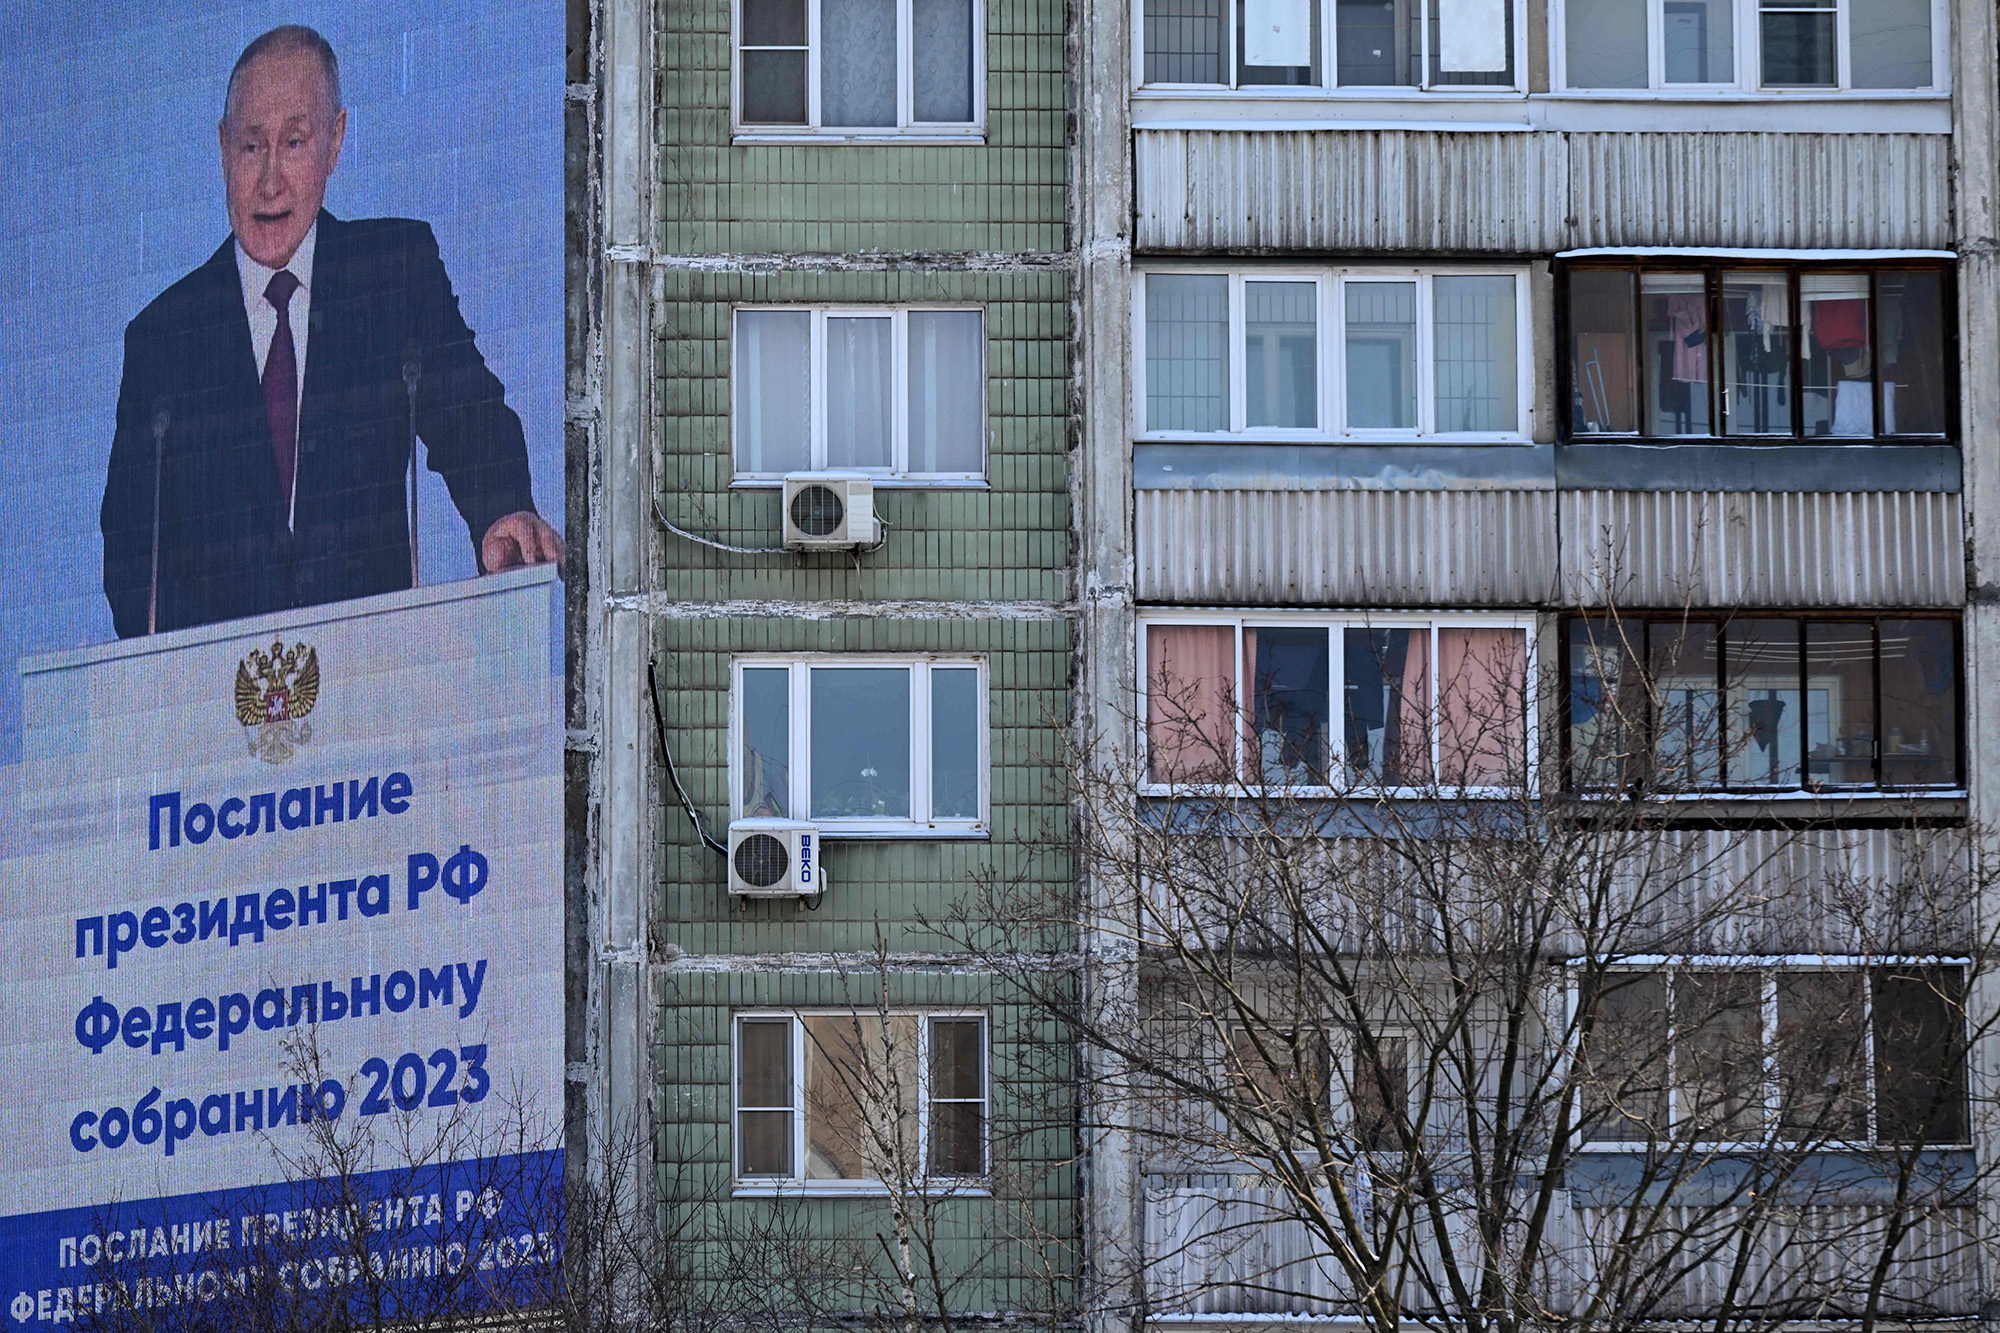 Russian President Vladimir Putin is seen on an outdoor screen on the facade of a building delivering his annual state of the nation address in Moscow, Russia, on February 21.